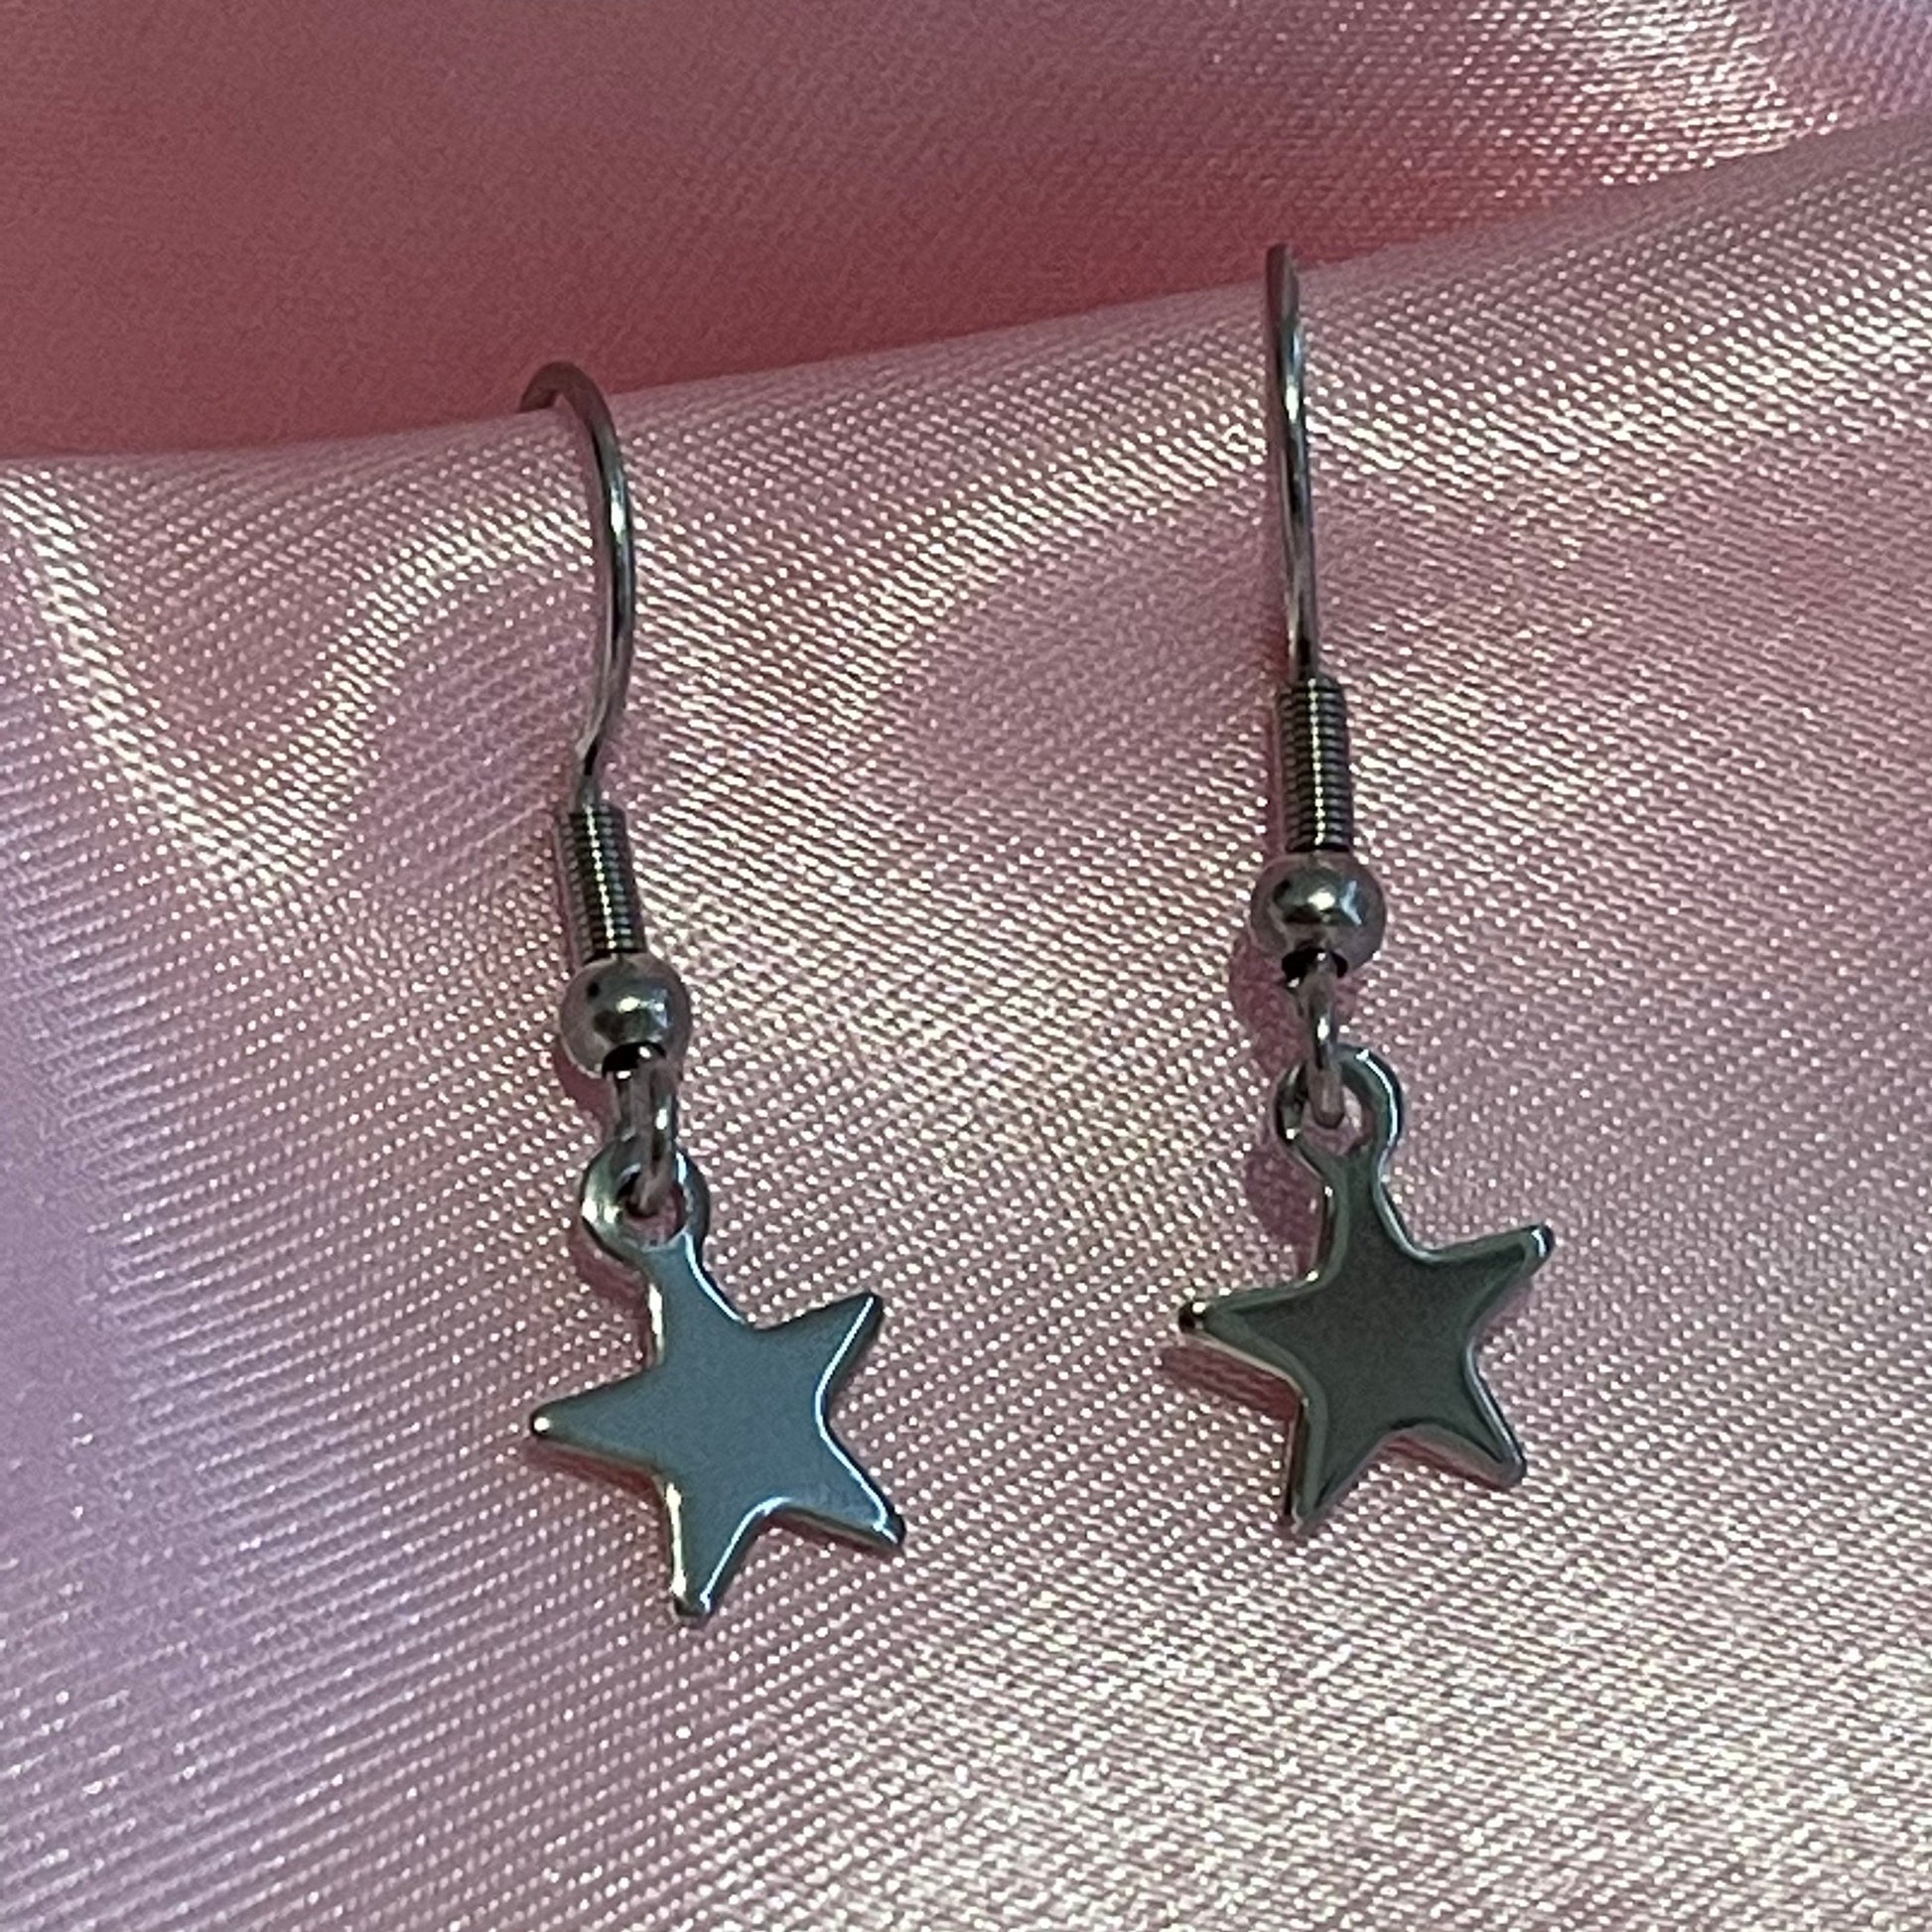 Small Silver Star Earrings - Lxyclr Authentic